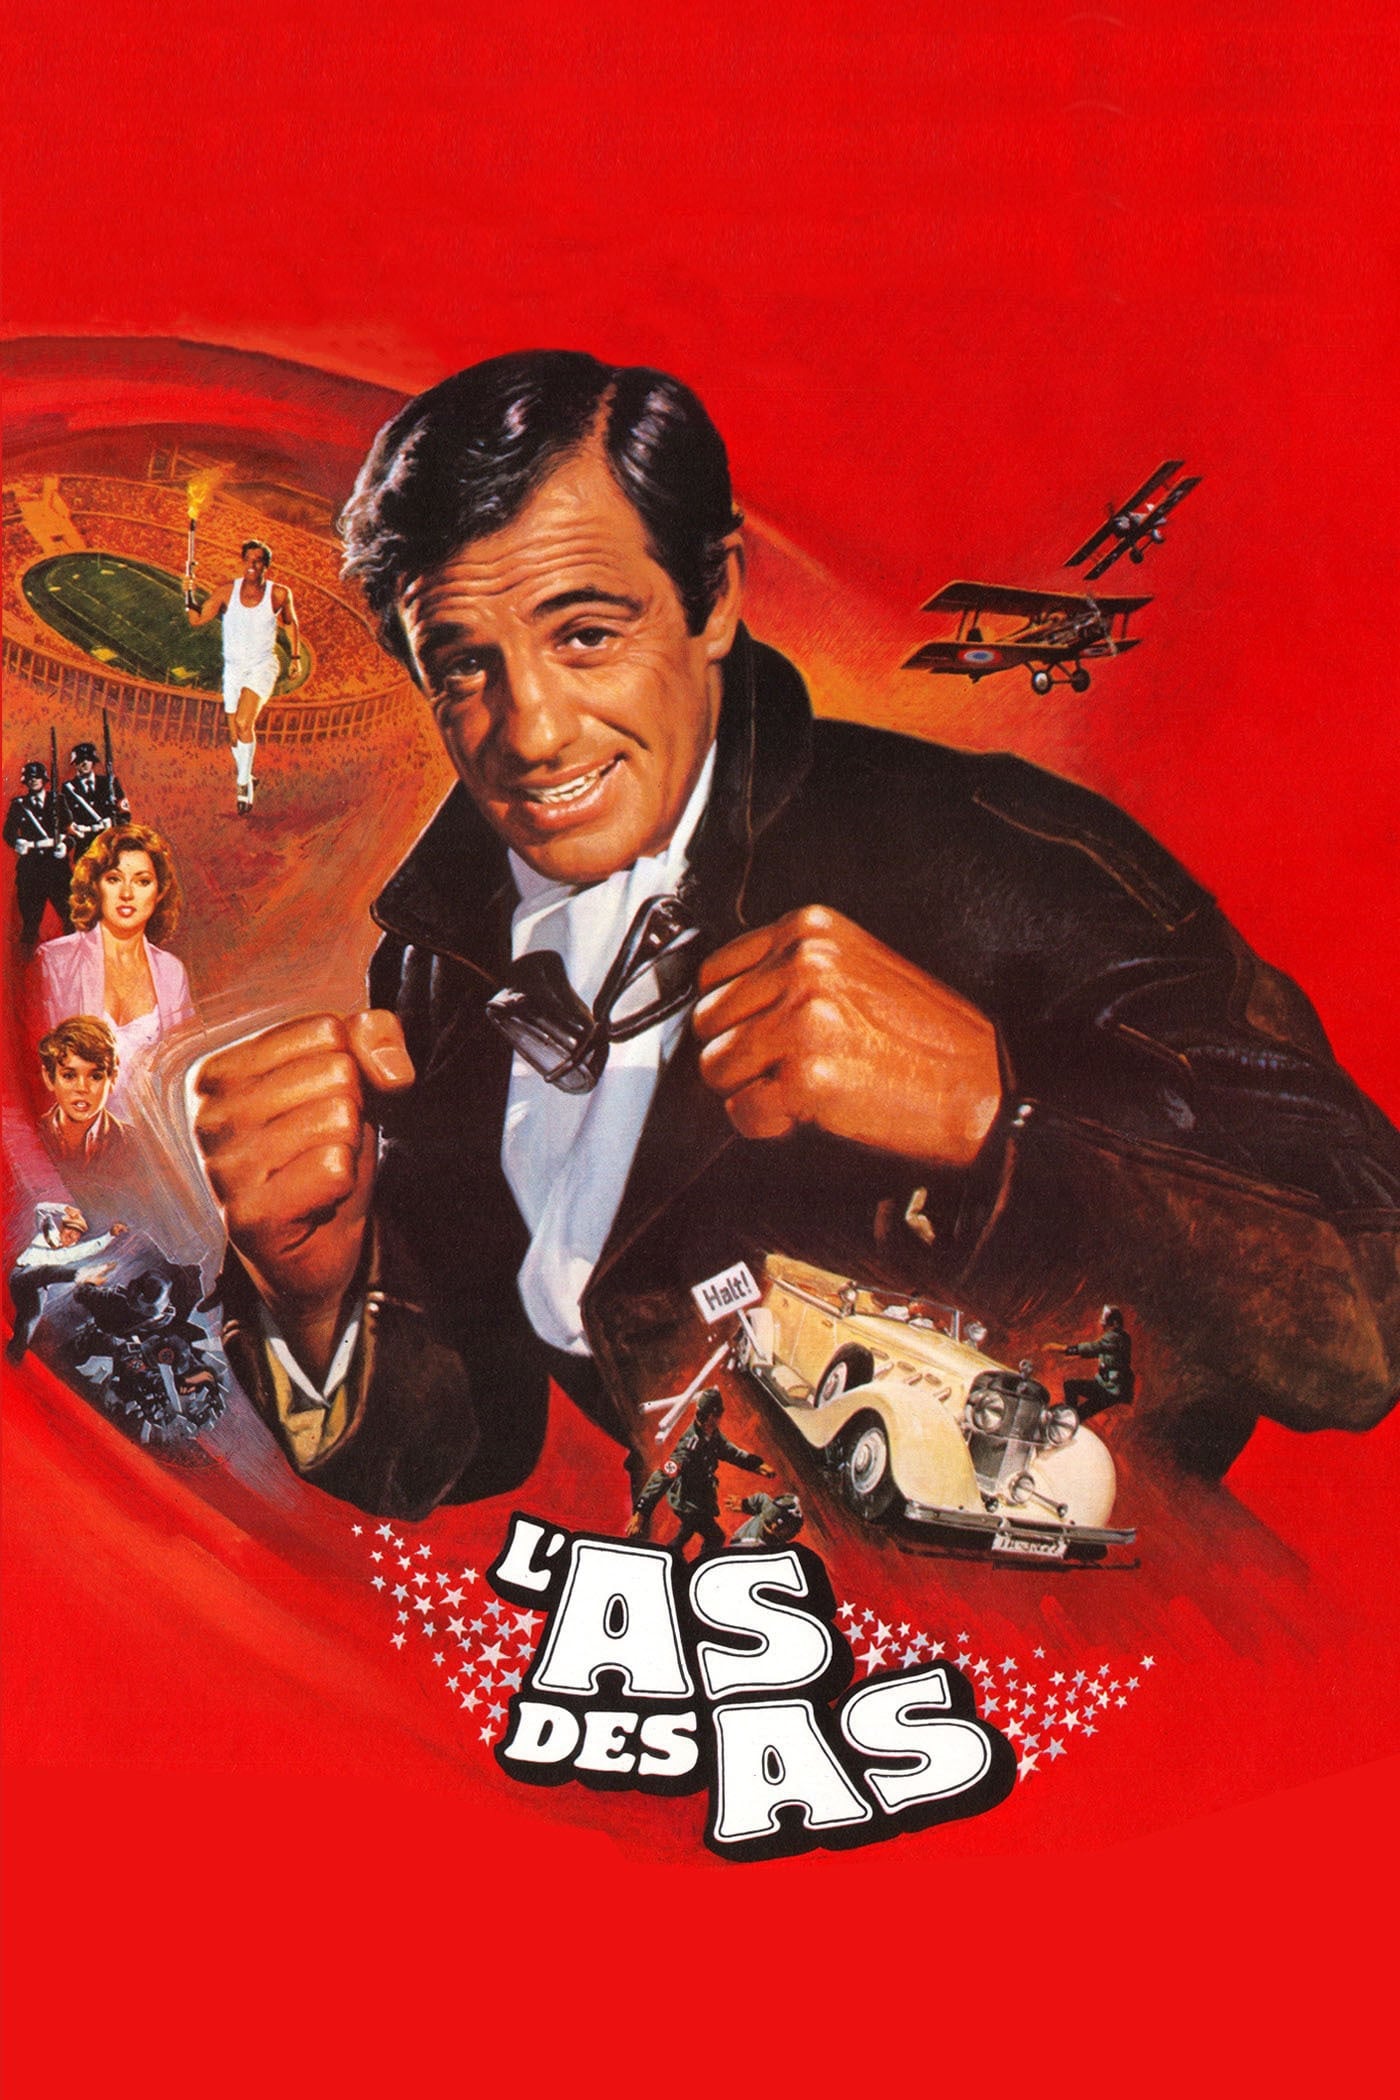 Ace of Aces (1982)